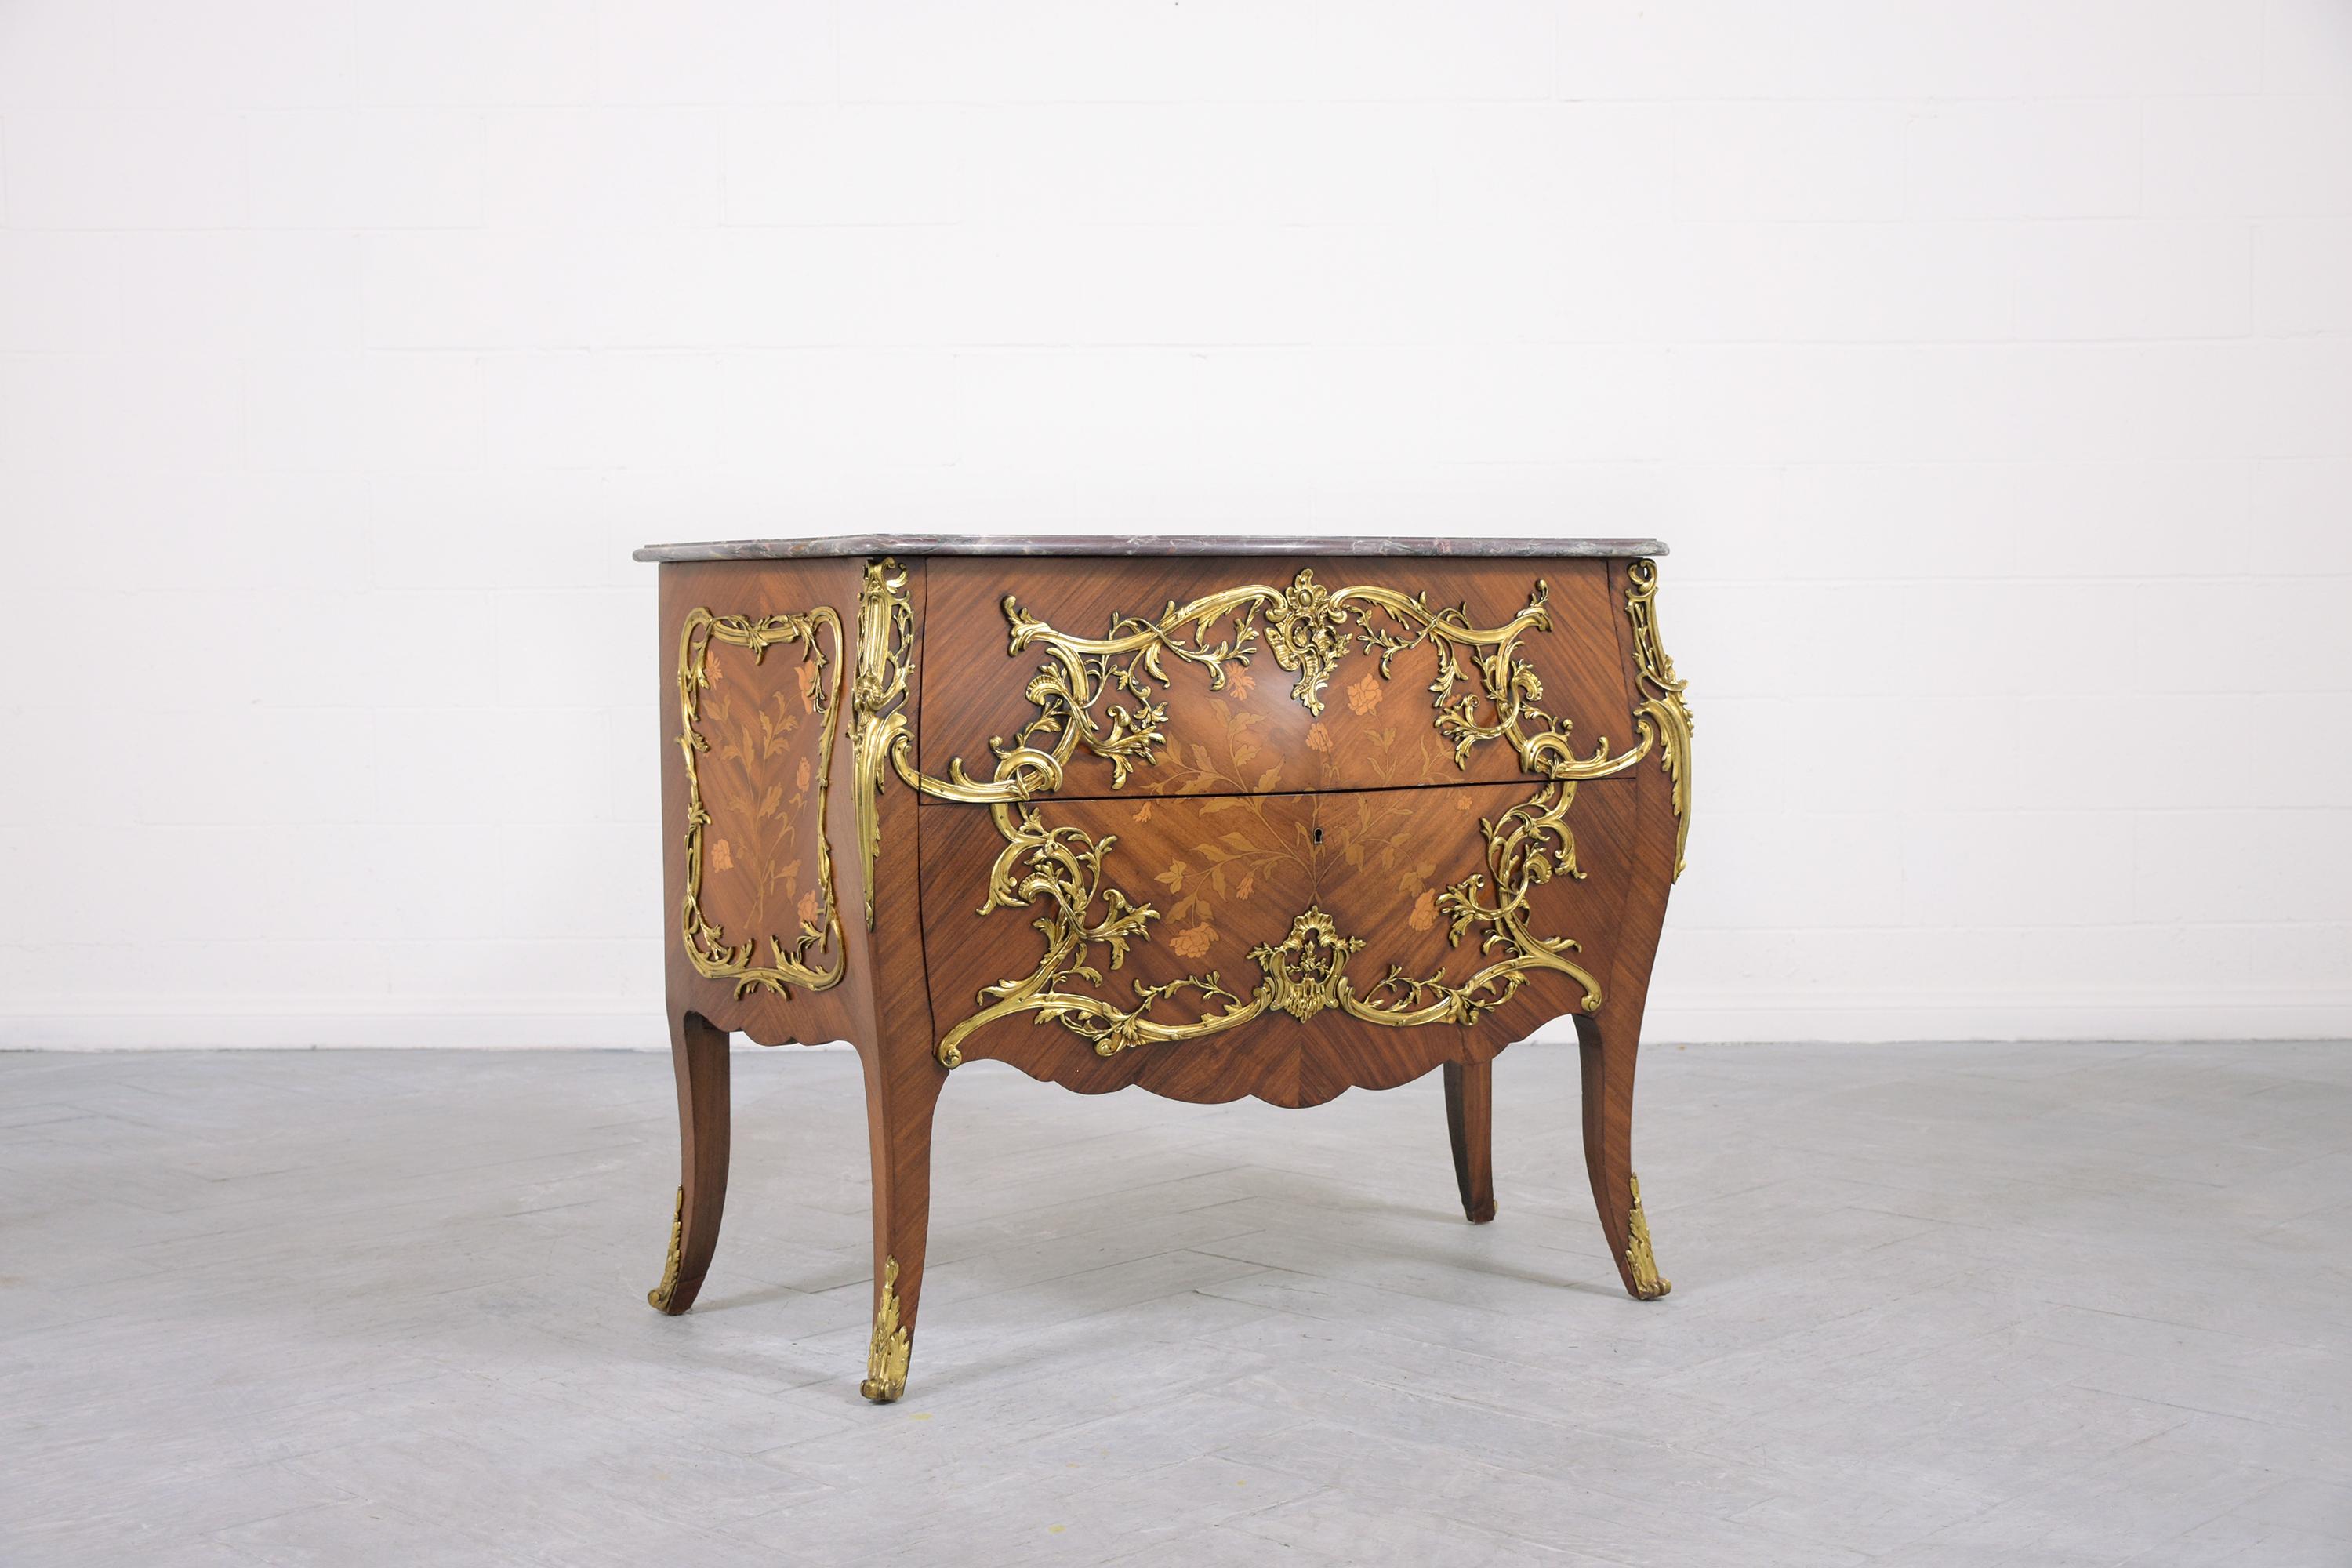 This extraordinary French 19th-century Louis XV commode is in great condition, is beautifully crafted out of wood bronze & marble combination, and is fully restored by our expert professional craftsmen team. This antique serpentine style commode